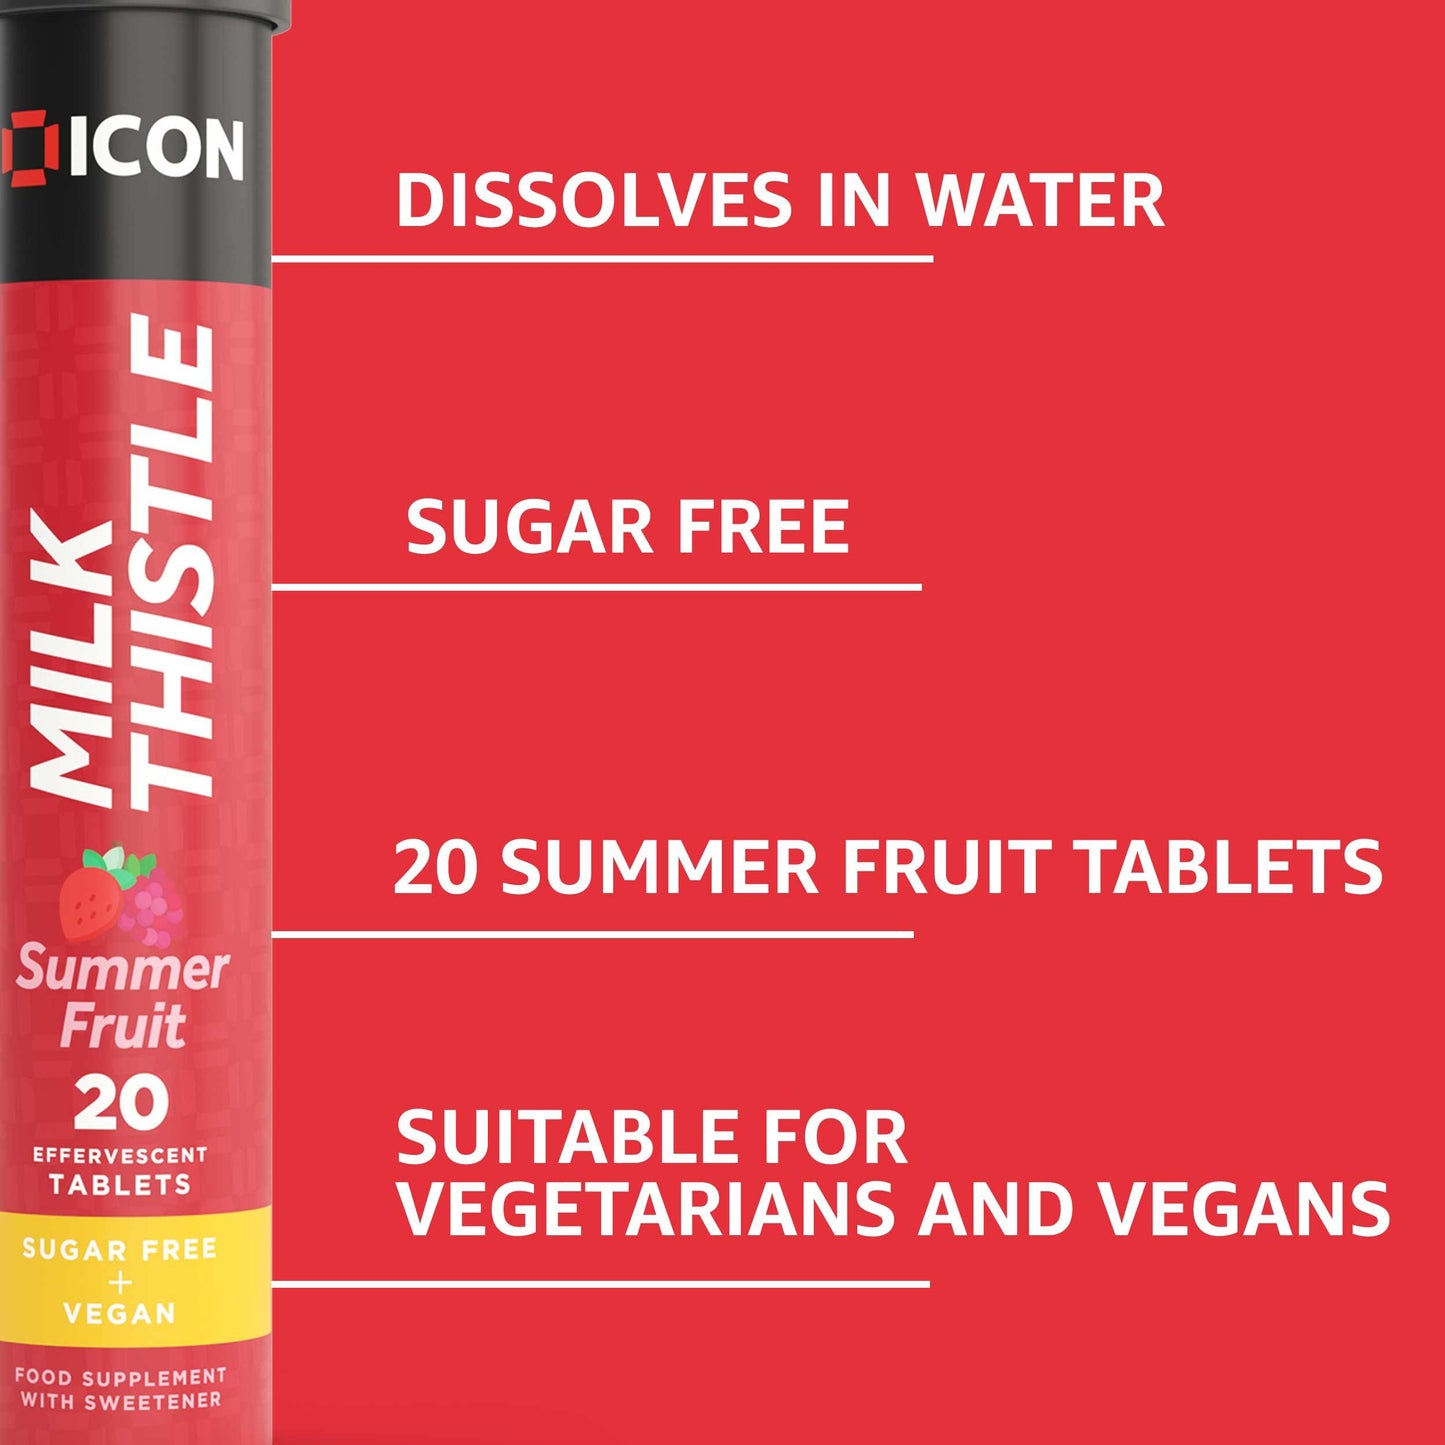 Load image into Gallery viewer, Milk Thistle Effervescent Tablets - Summer Fruit Flavour, Sugar Free, Vegan - 20 Tablets - ICON Nutrition
